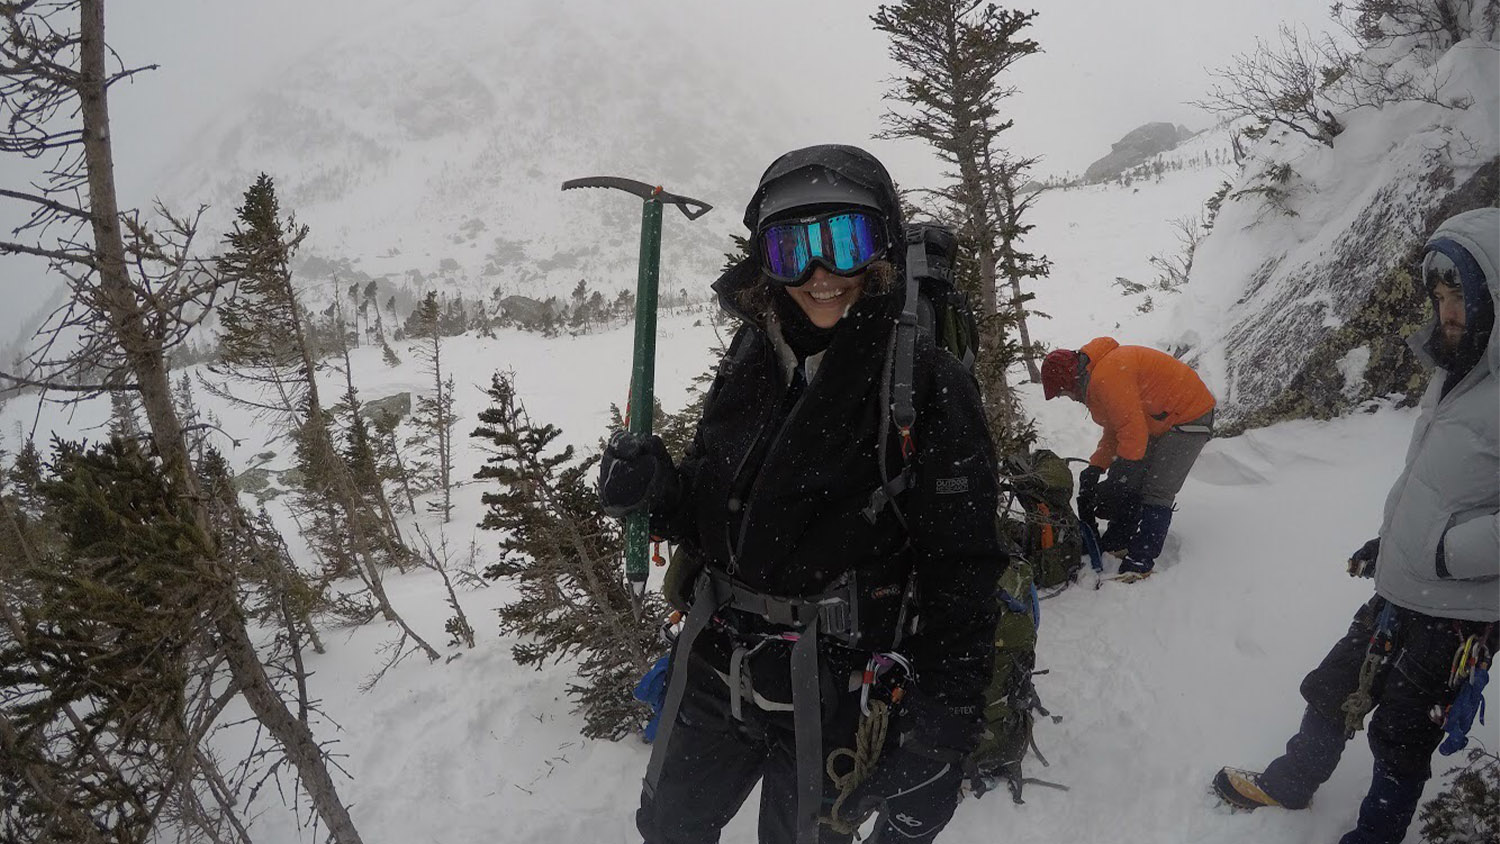 Alyssa Stroker holds a pick axe during a mountain climb in the snow